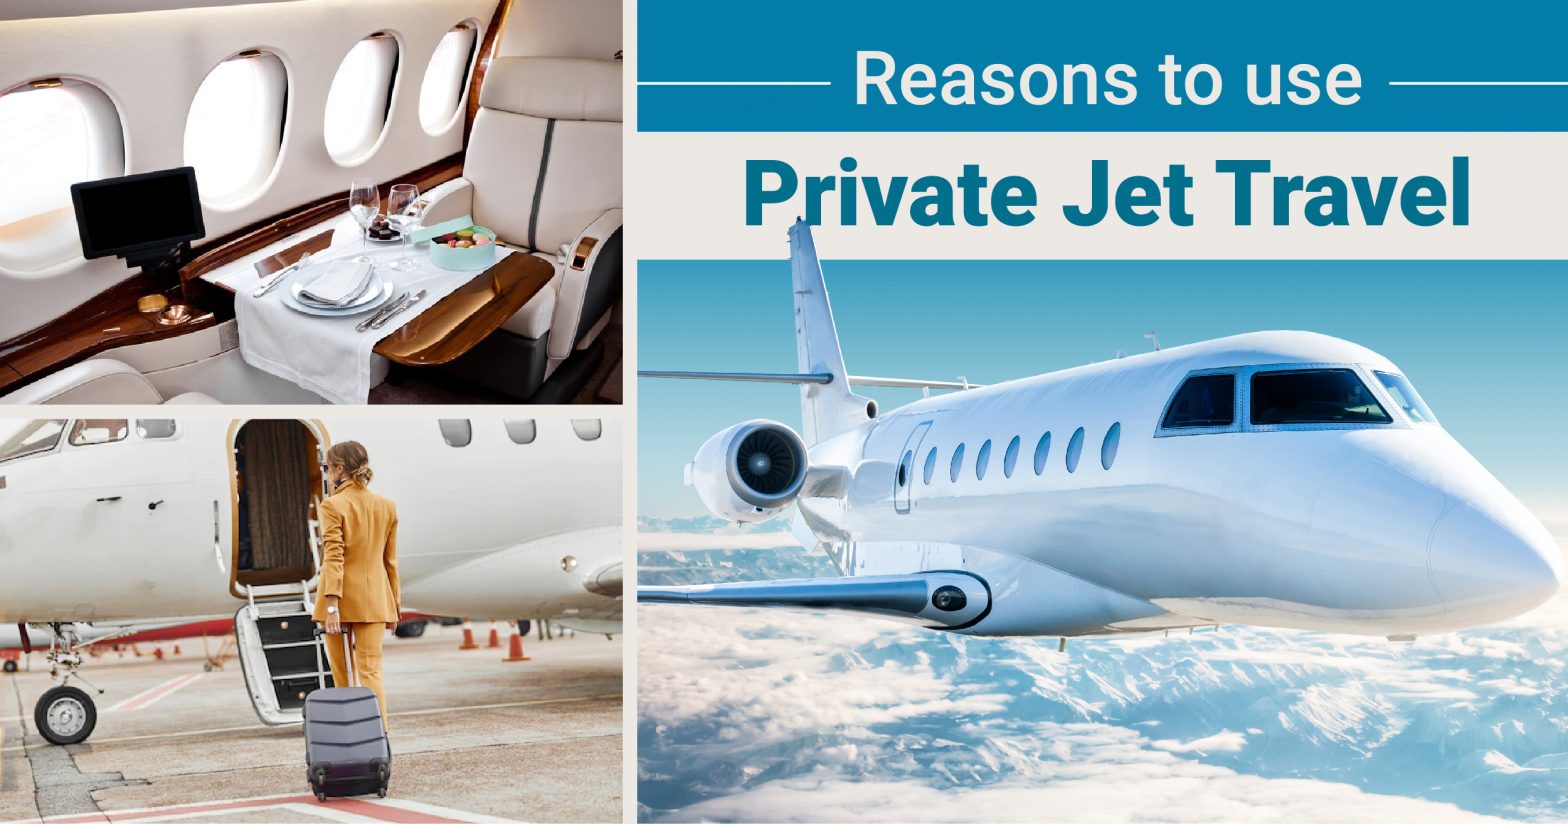 Reasons to use Private Jet Travel